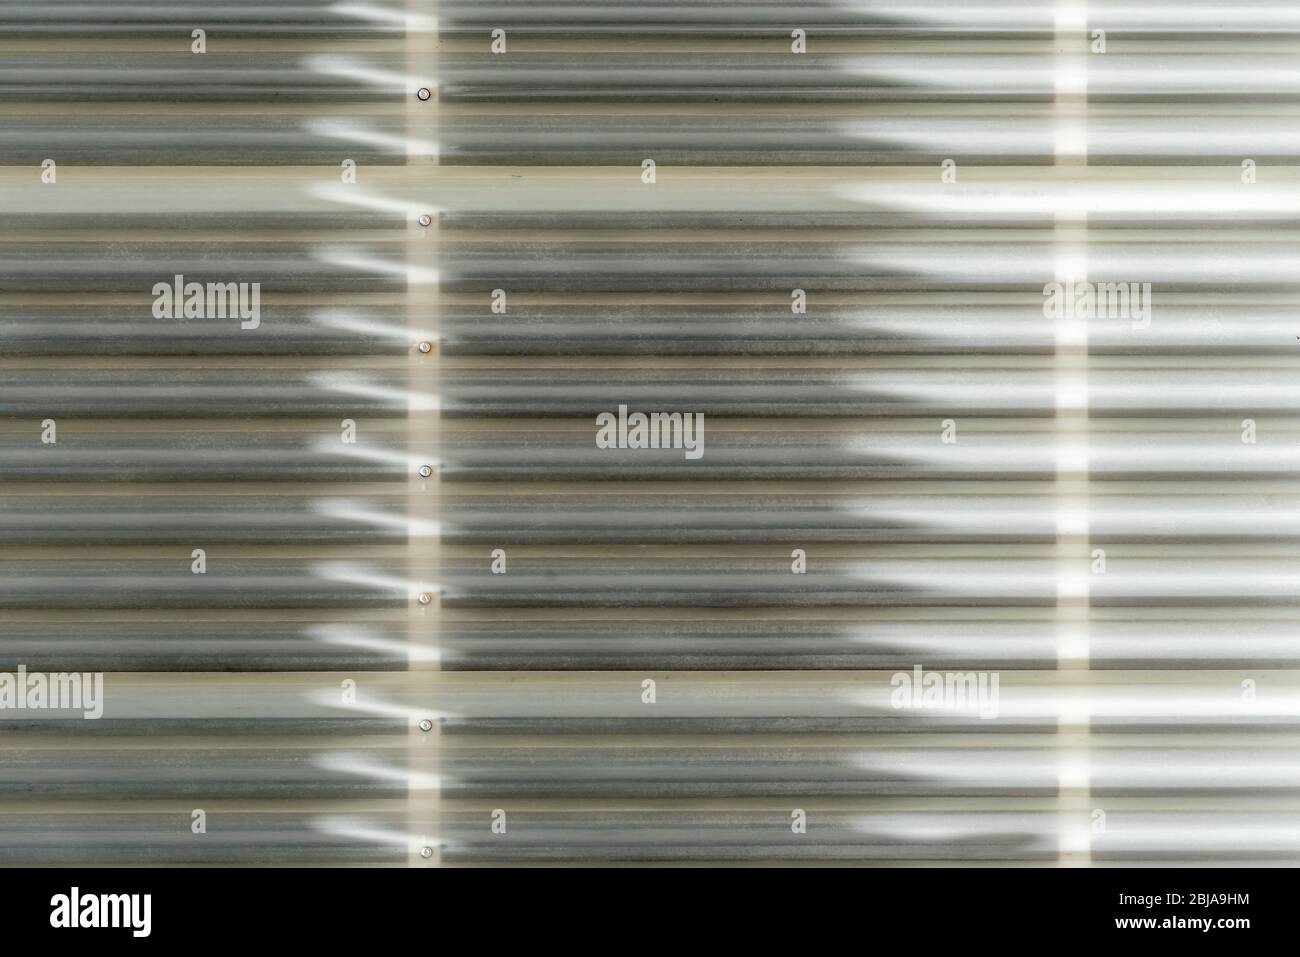 Shadow and light form linear and arrow abstract patterns as sunlight hits exterior plastic cladding on a wall in Australia Stock Photo